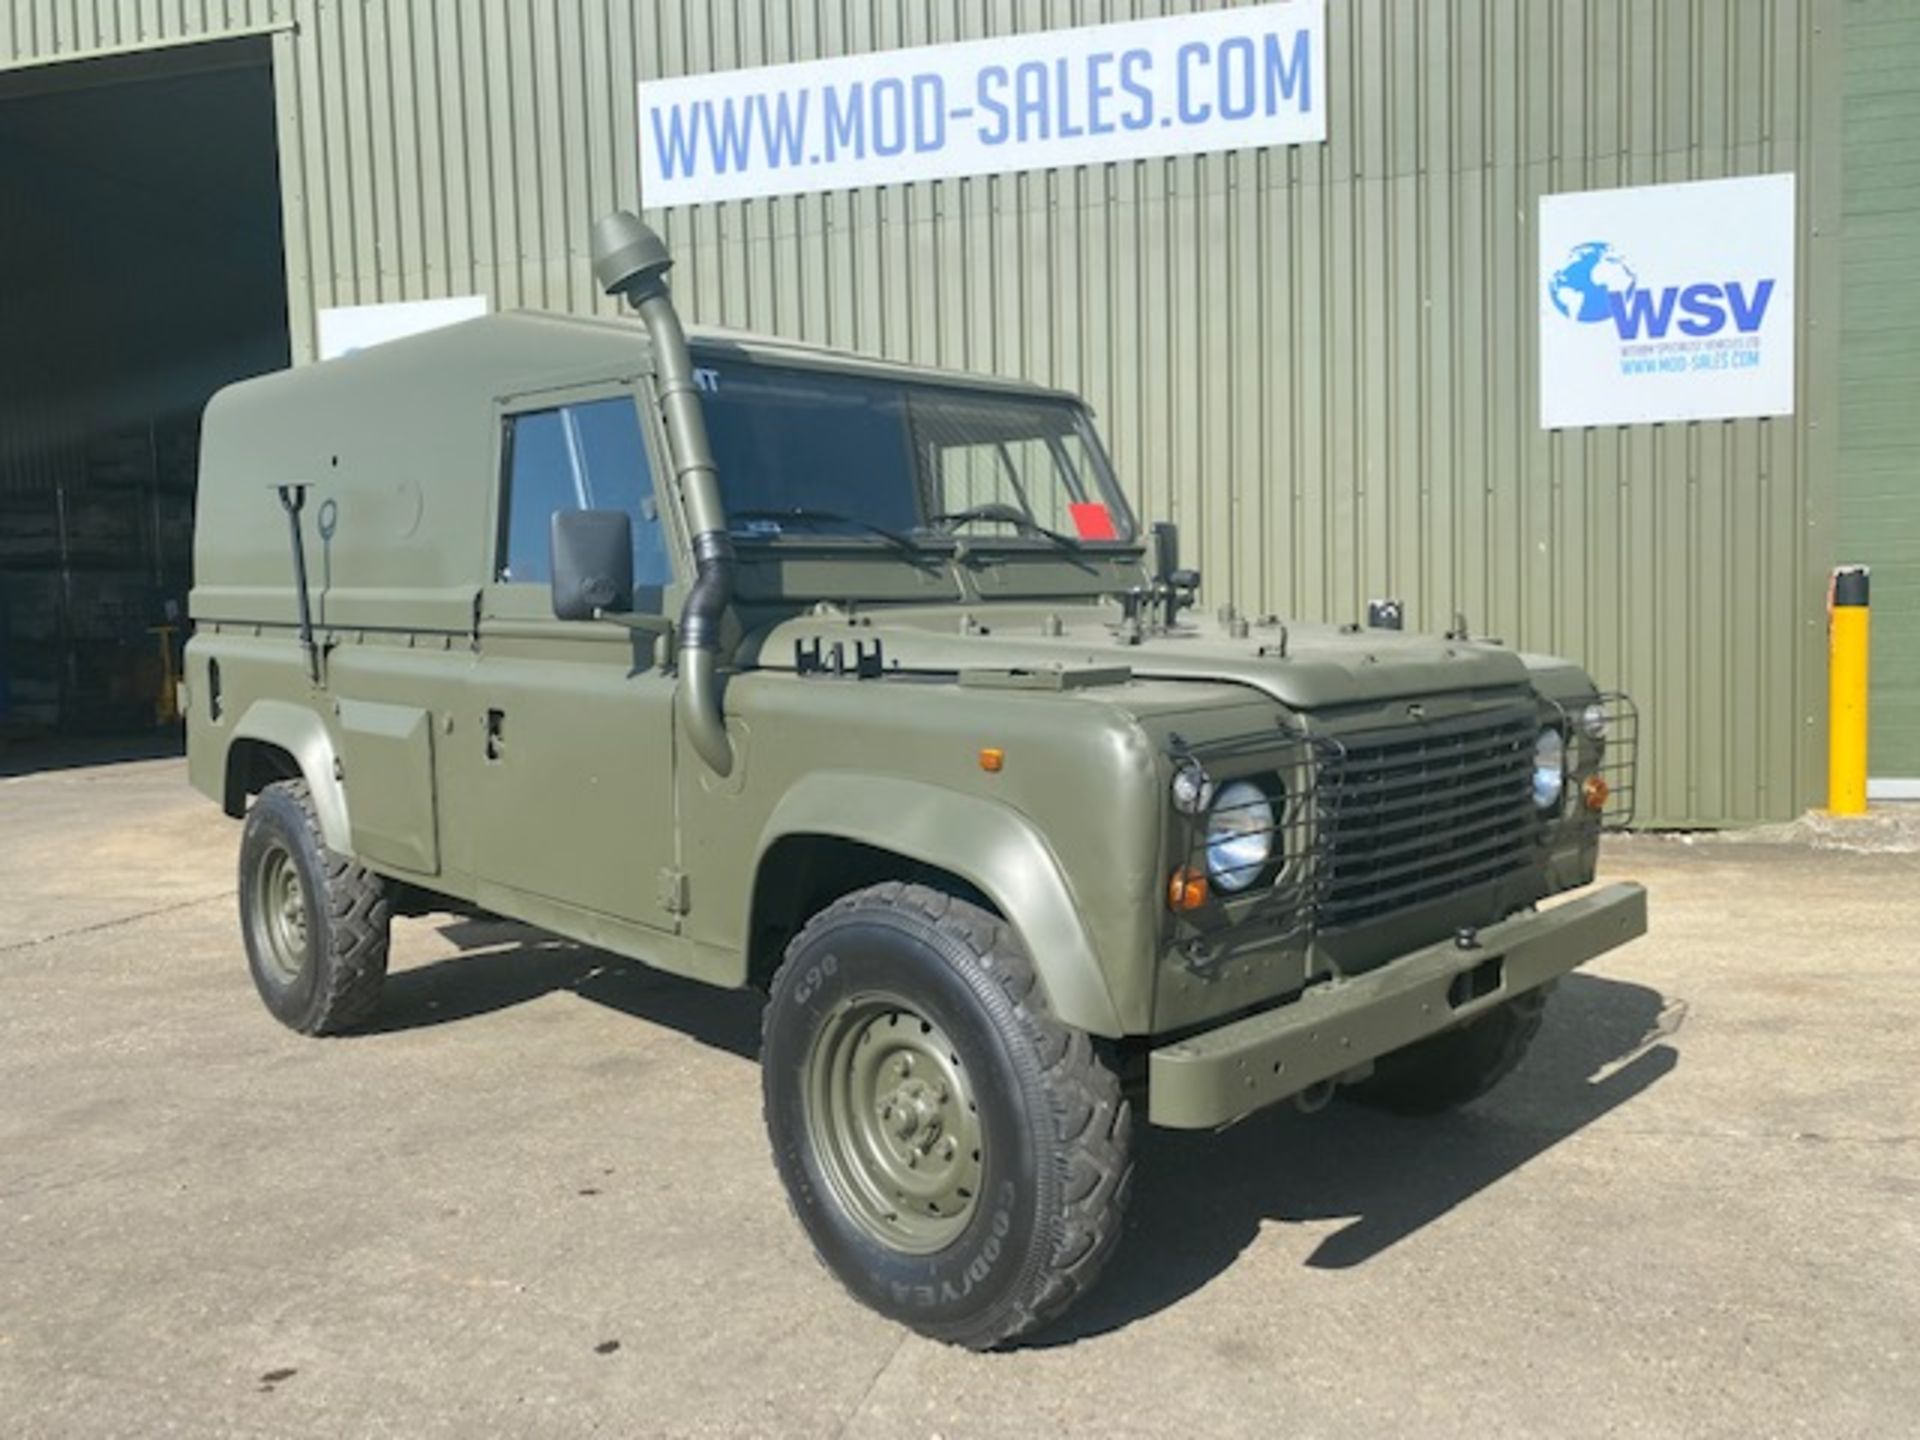 1997 Military Specification Left Hand Drive Land Rover Wolf 110 FFR Hard Top ONLY 172,783Km